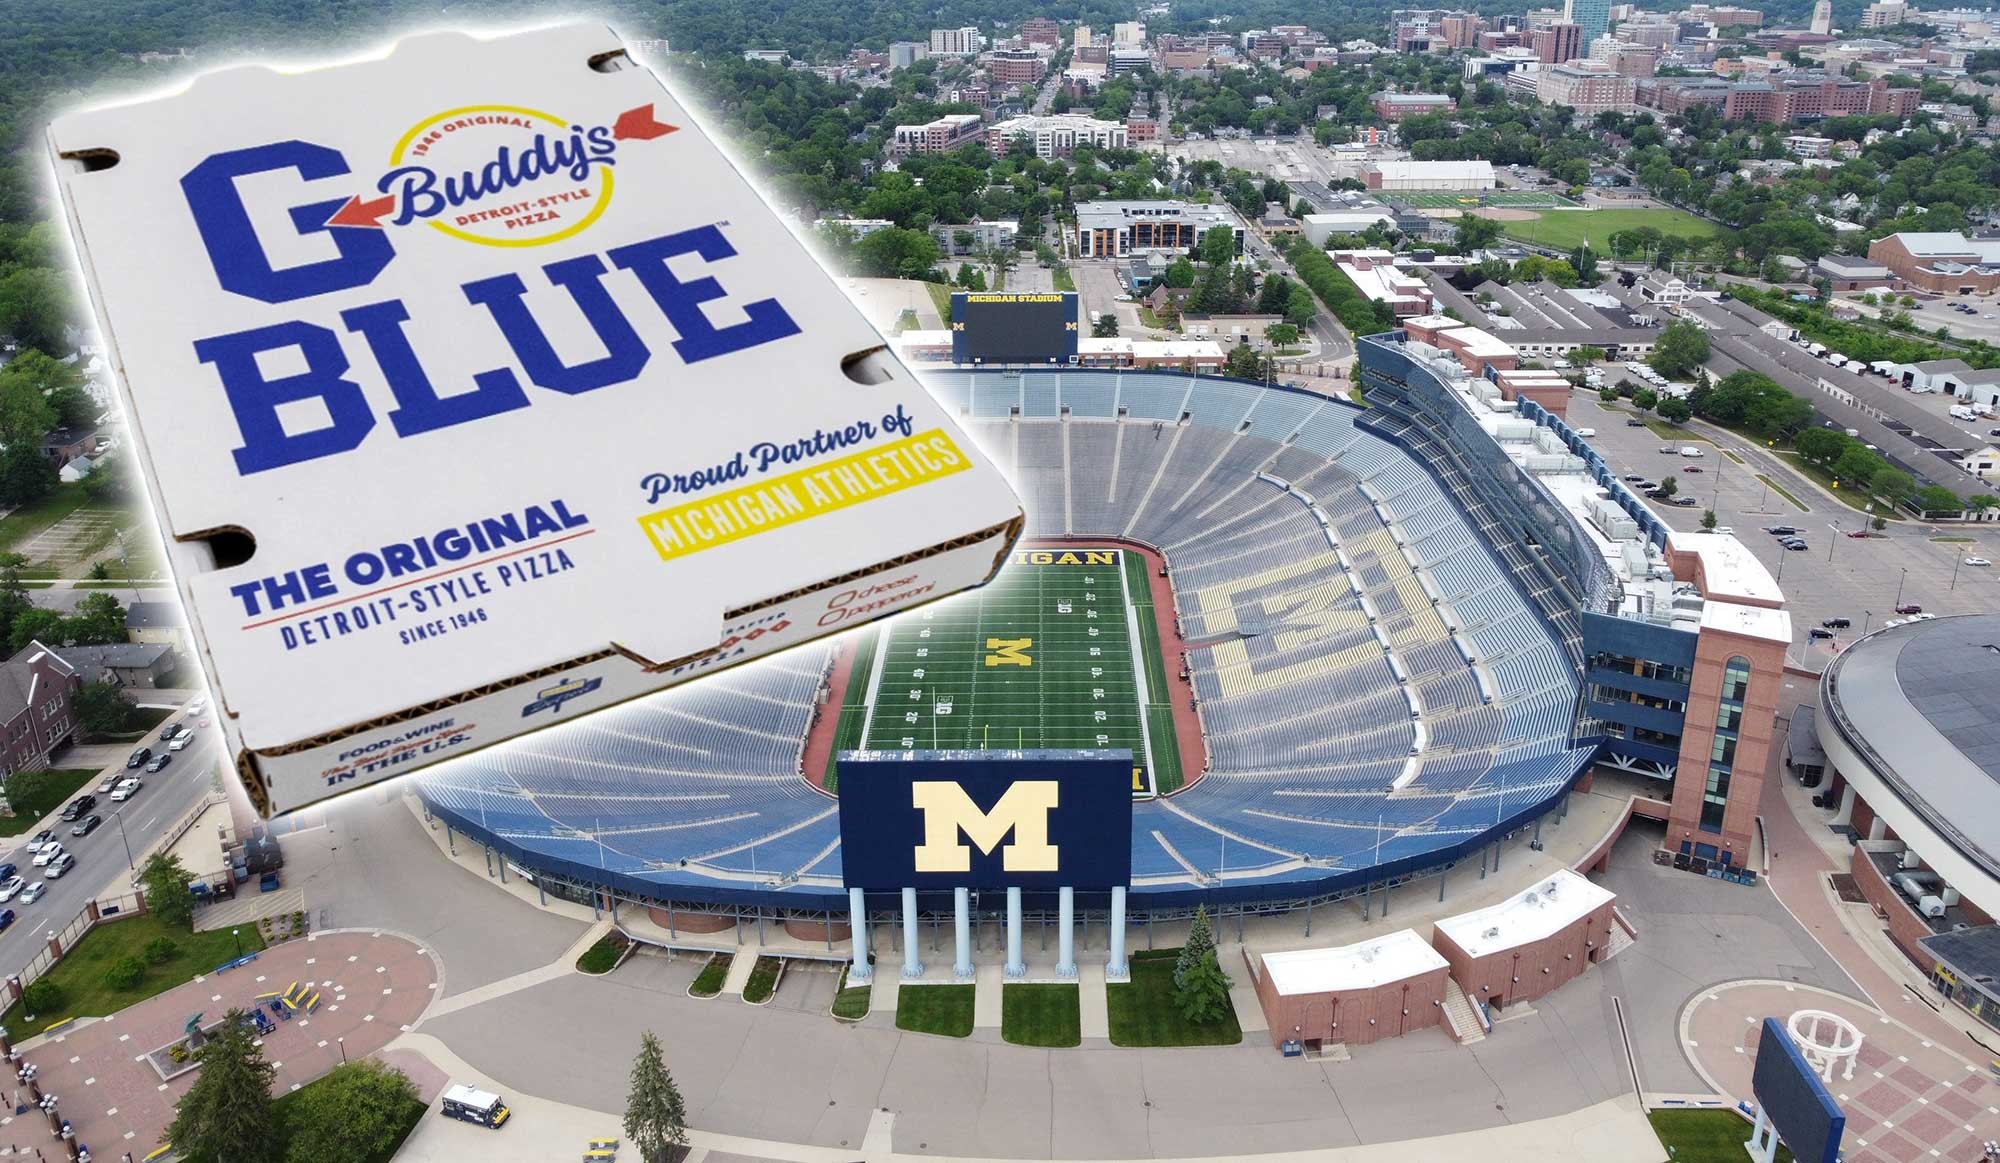 Buddy's Pizza will be served at Ann Arbor's 'Big House' this fall in  Michigan Athletics deal | Food News | Detroit | Detroit Metro Times